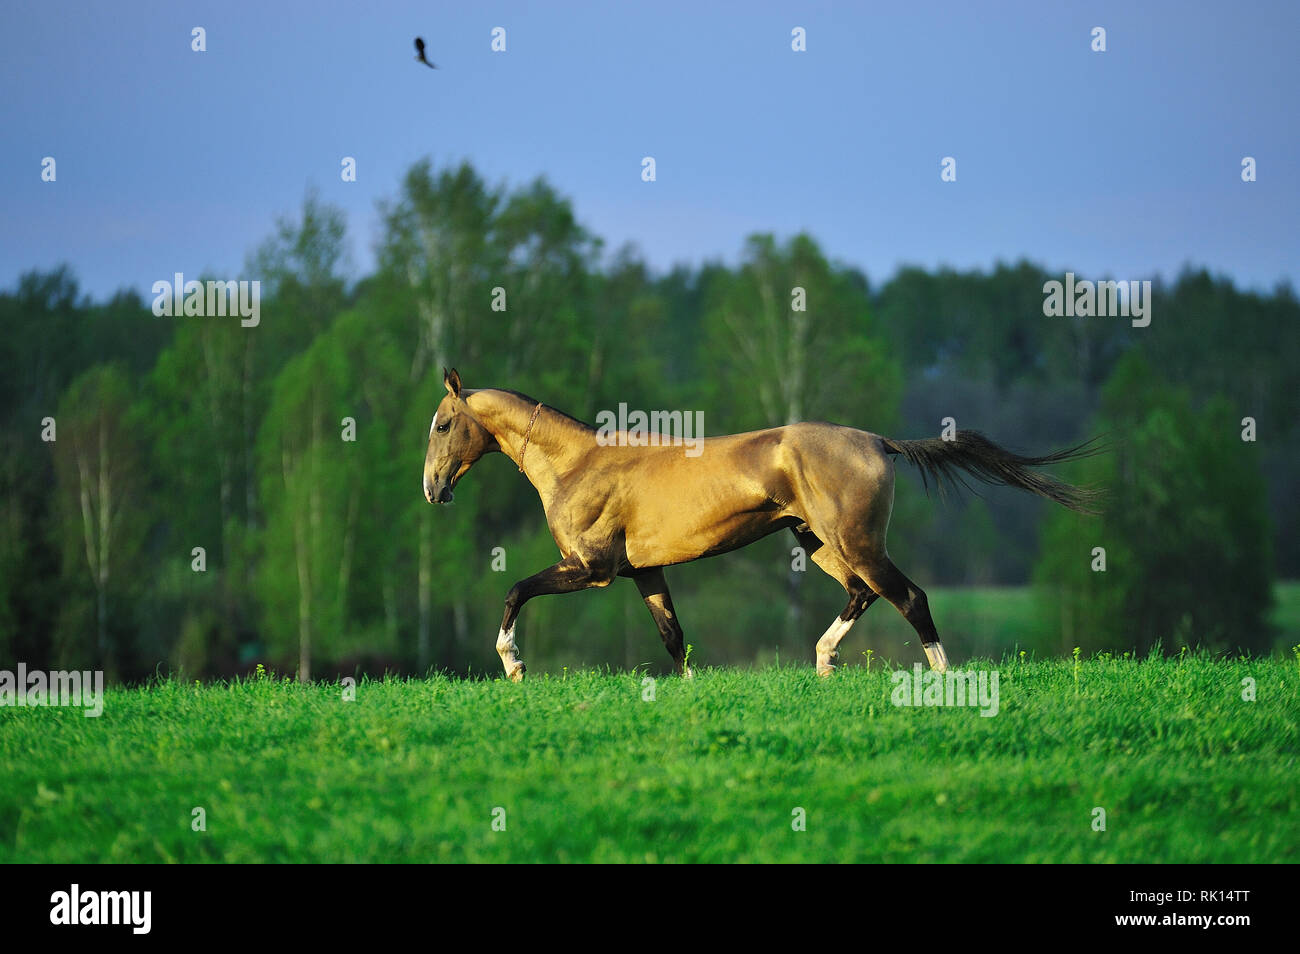 Young free Akhal Teke horse runs in the field. Horizontal, side view, in motion. Stock Photo